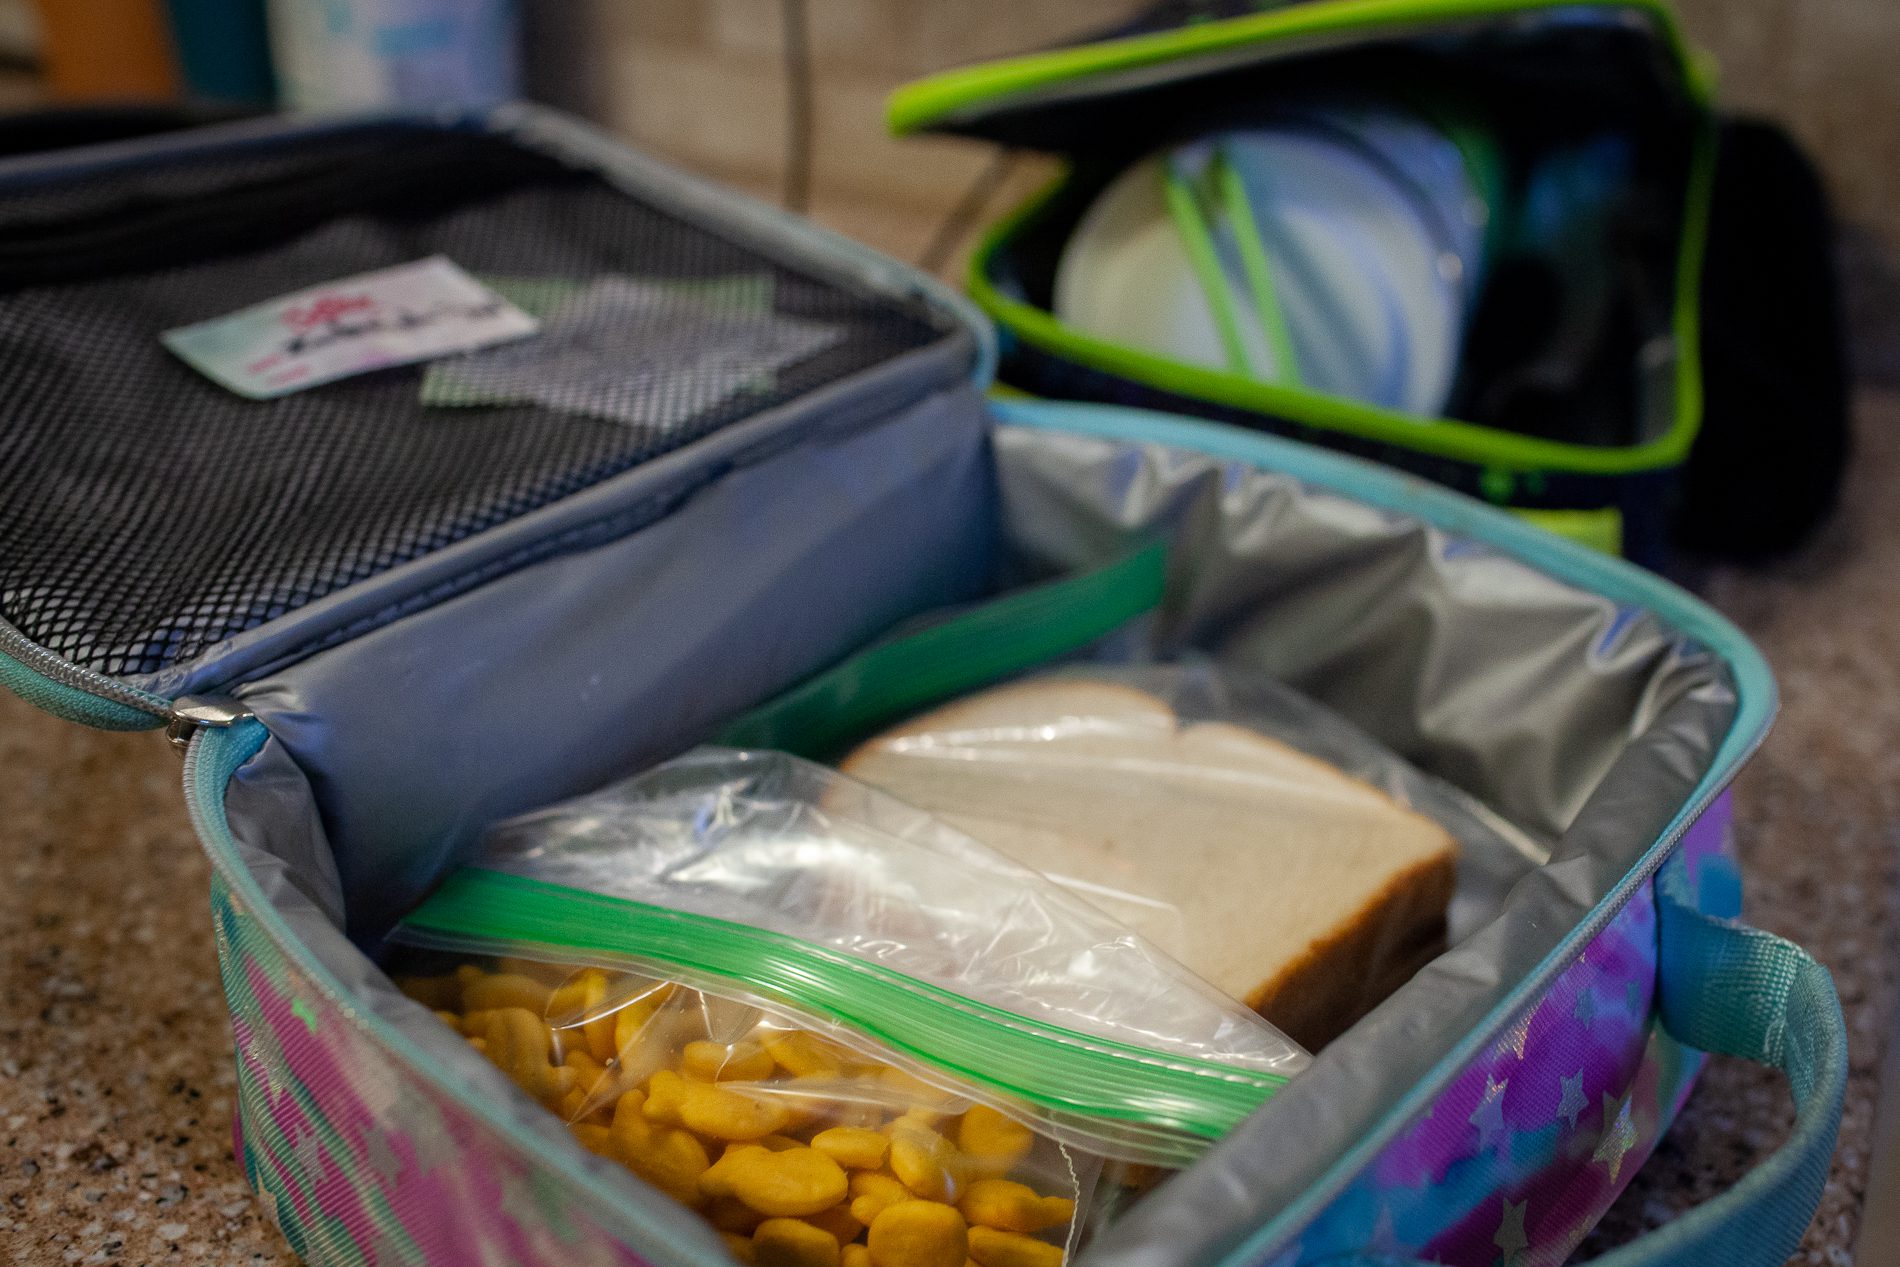 An open lunchbox with goldfish and a sandwich